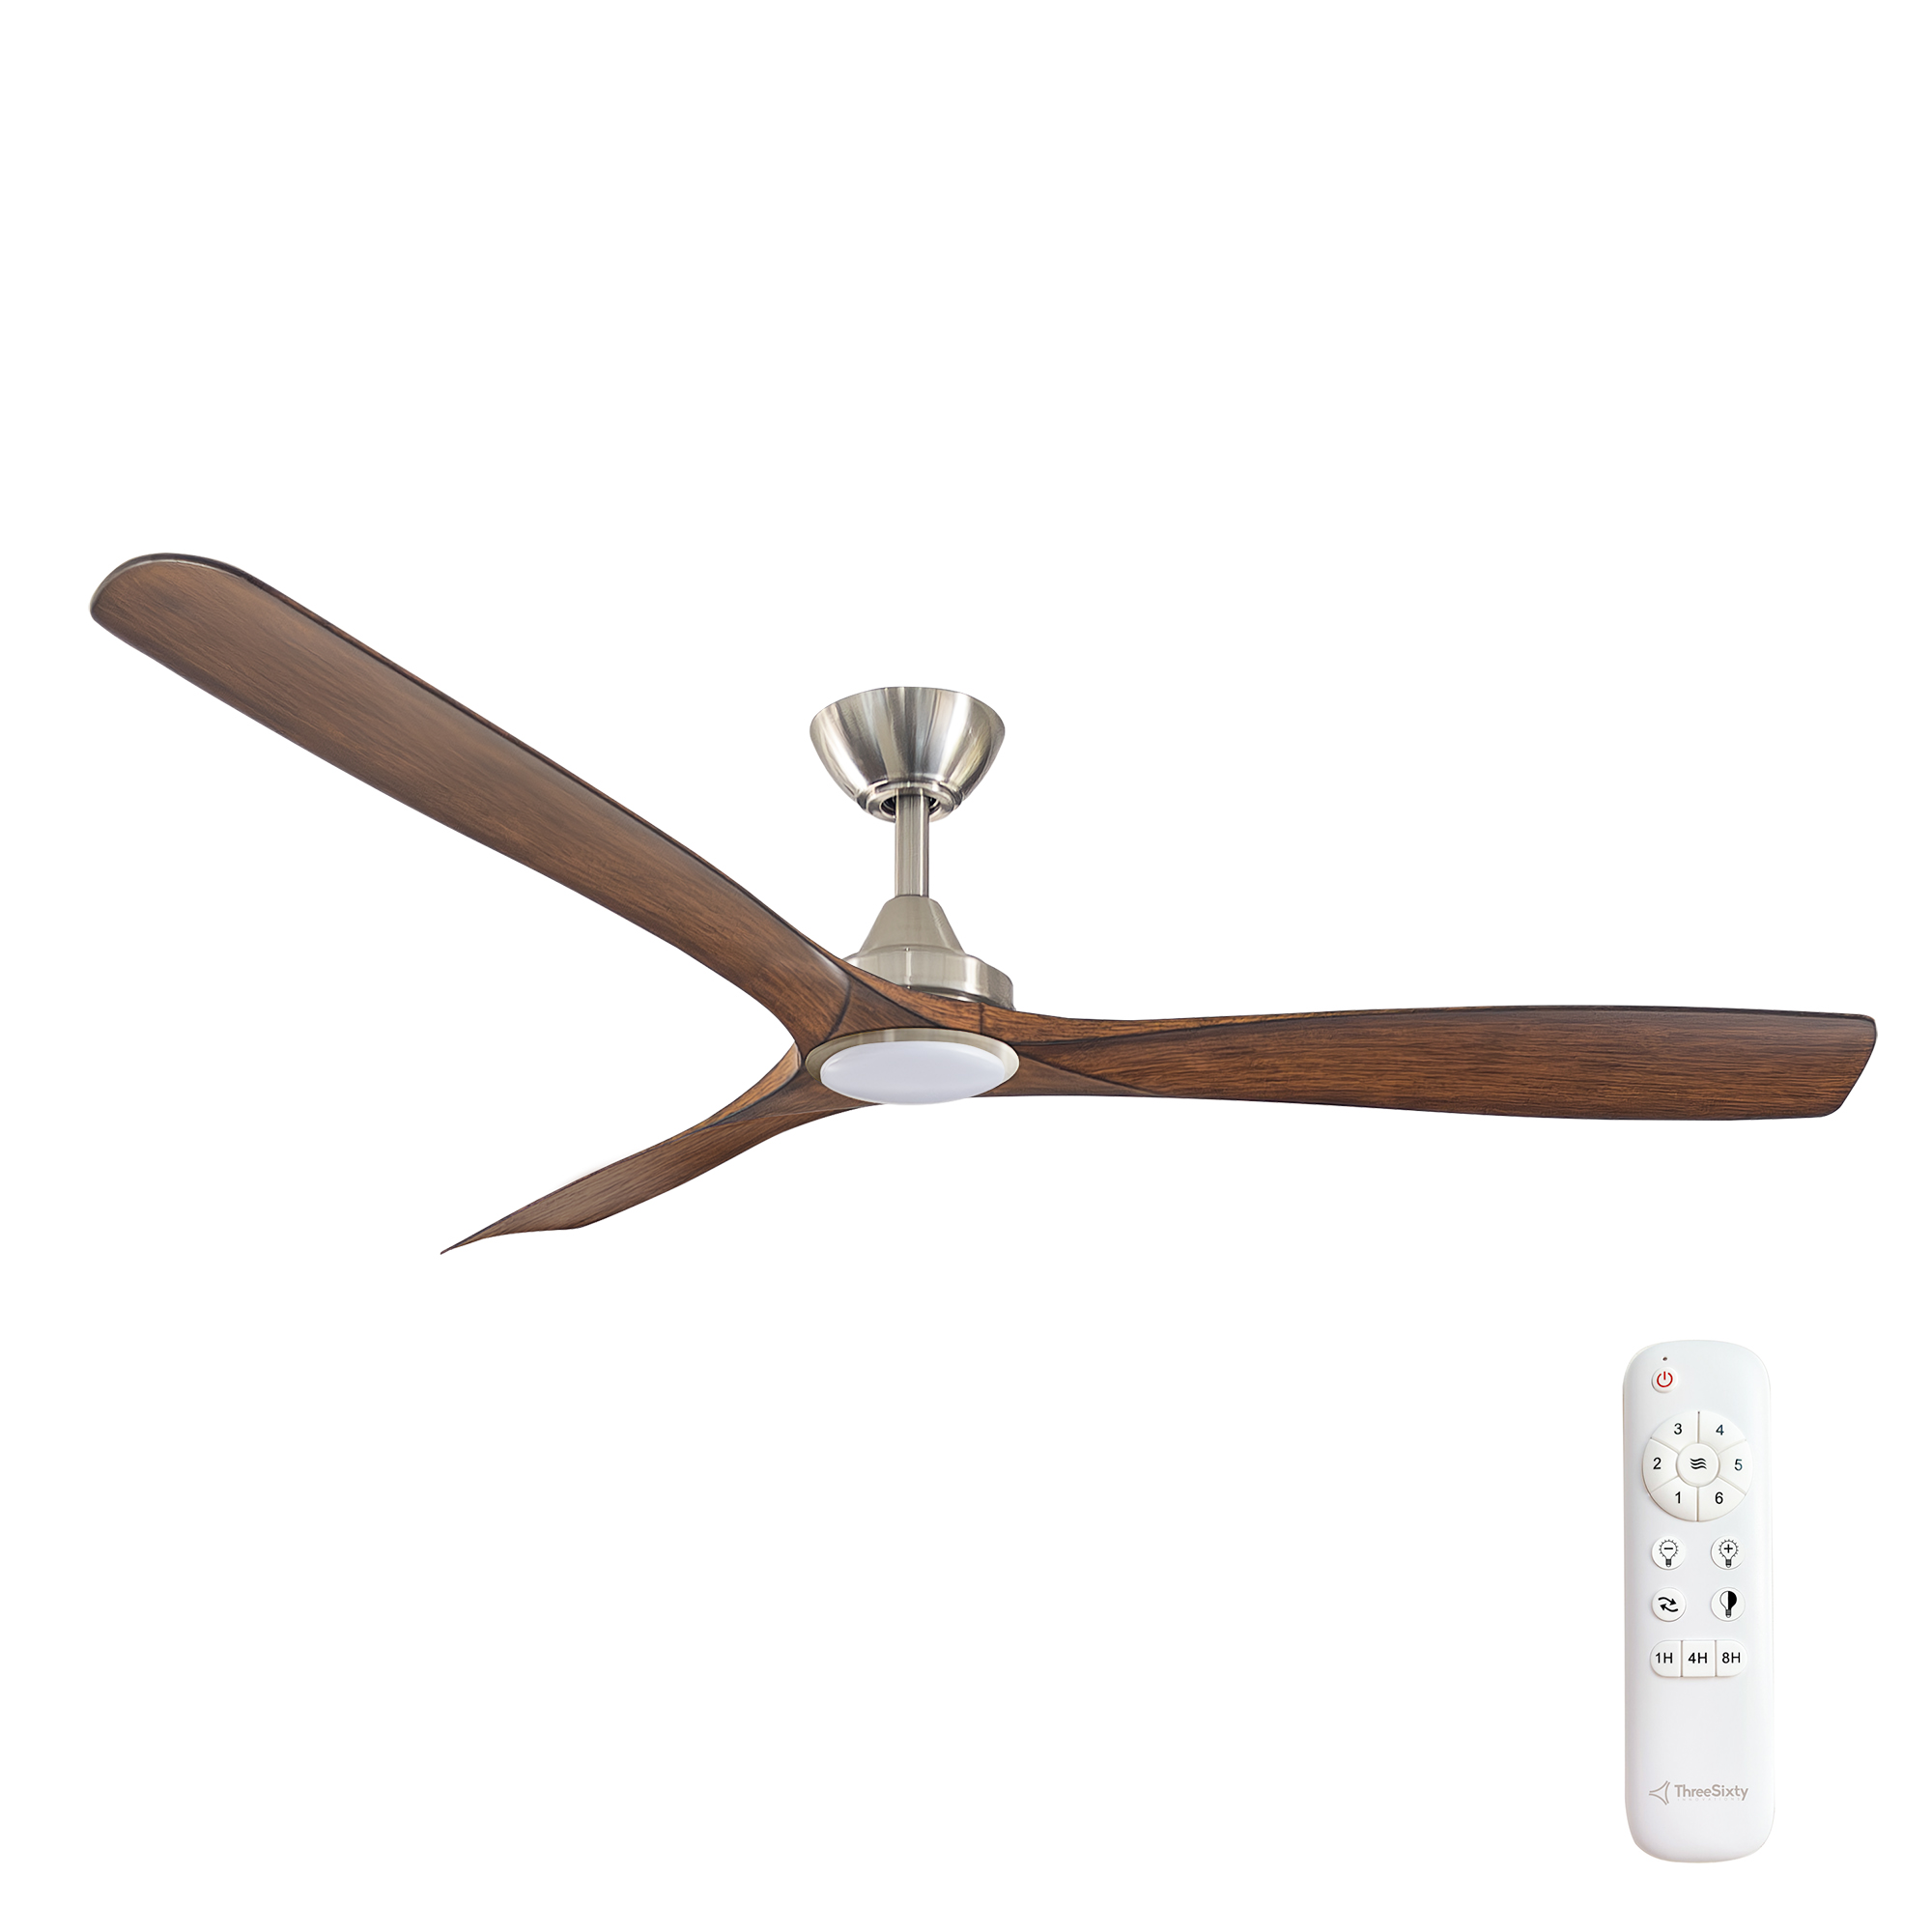 60" Spitfire DC Ceiling Fan in Brushed Nickel with Koa blades and 18W LED Light Kit